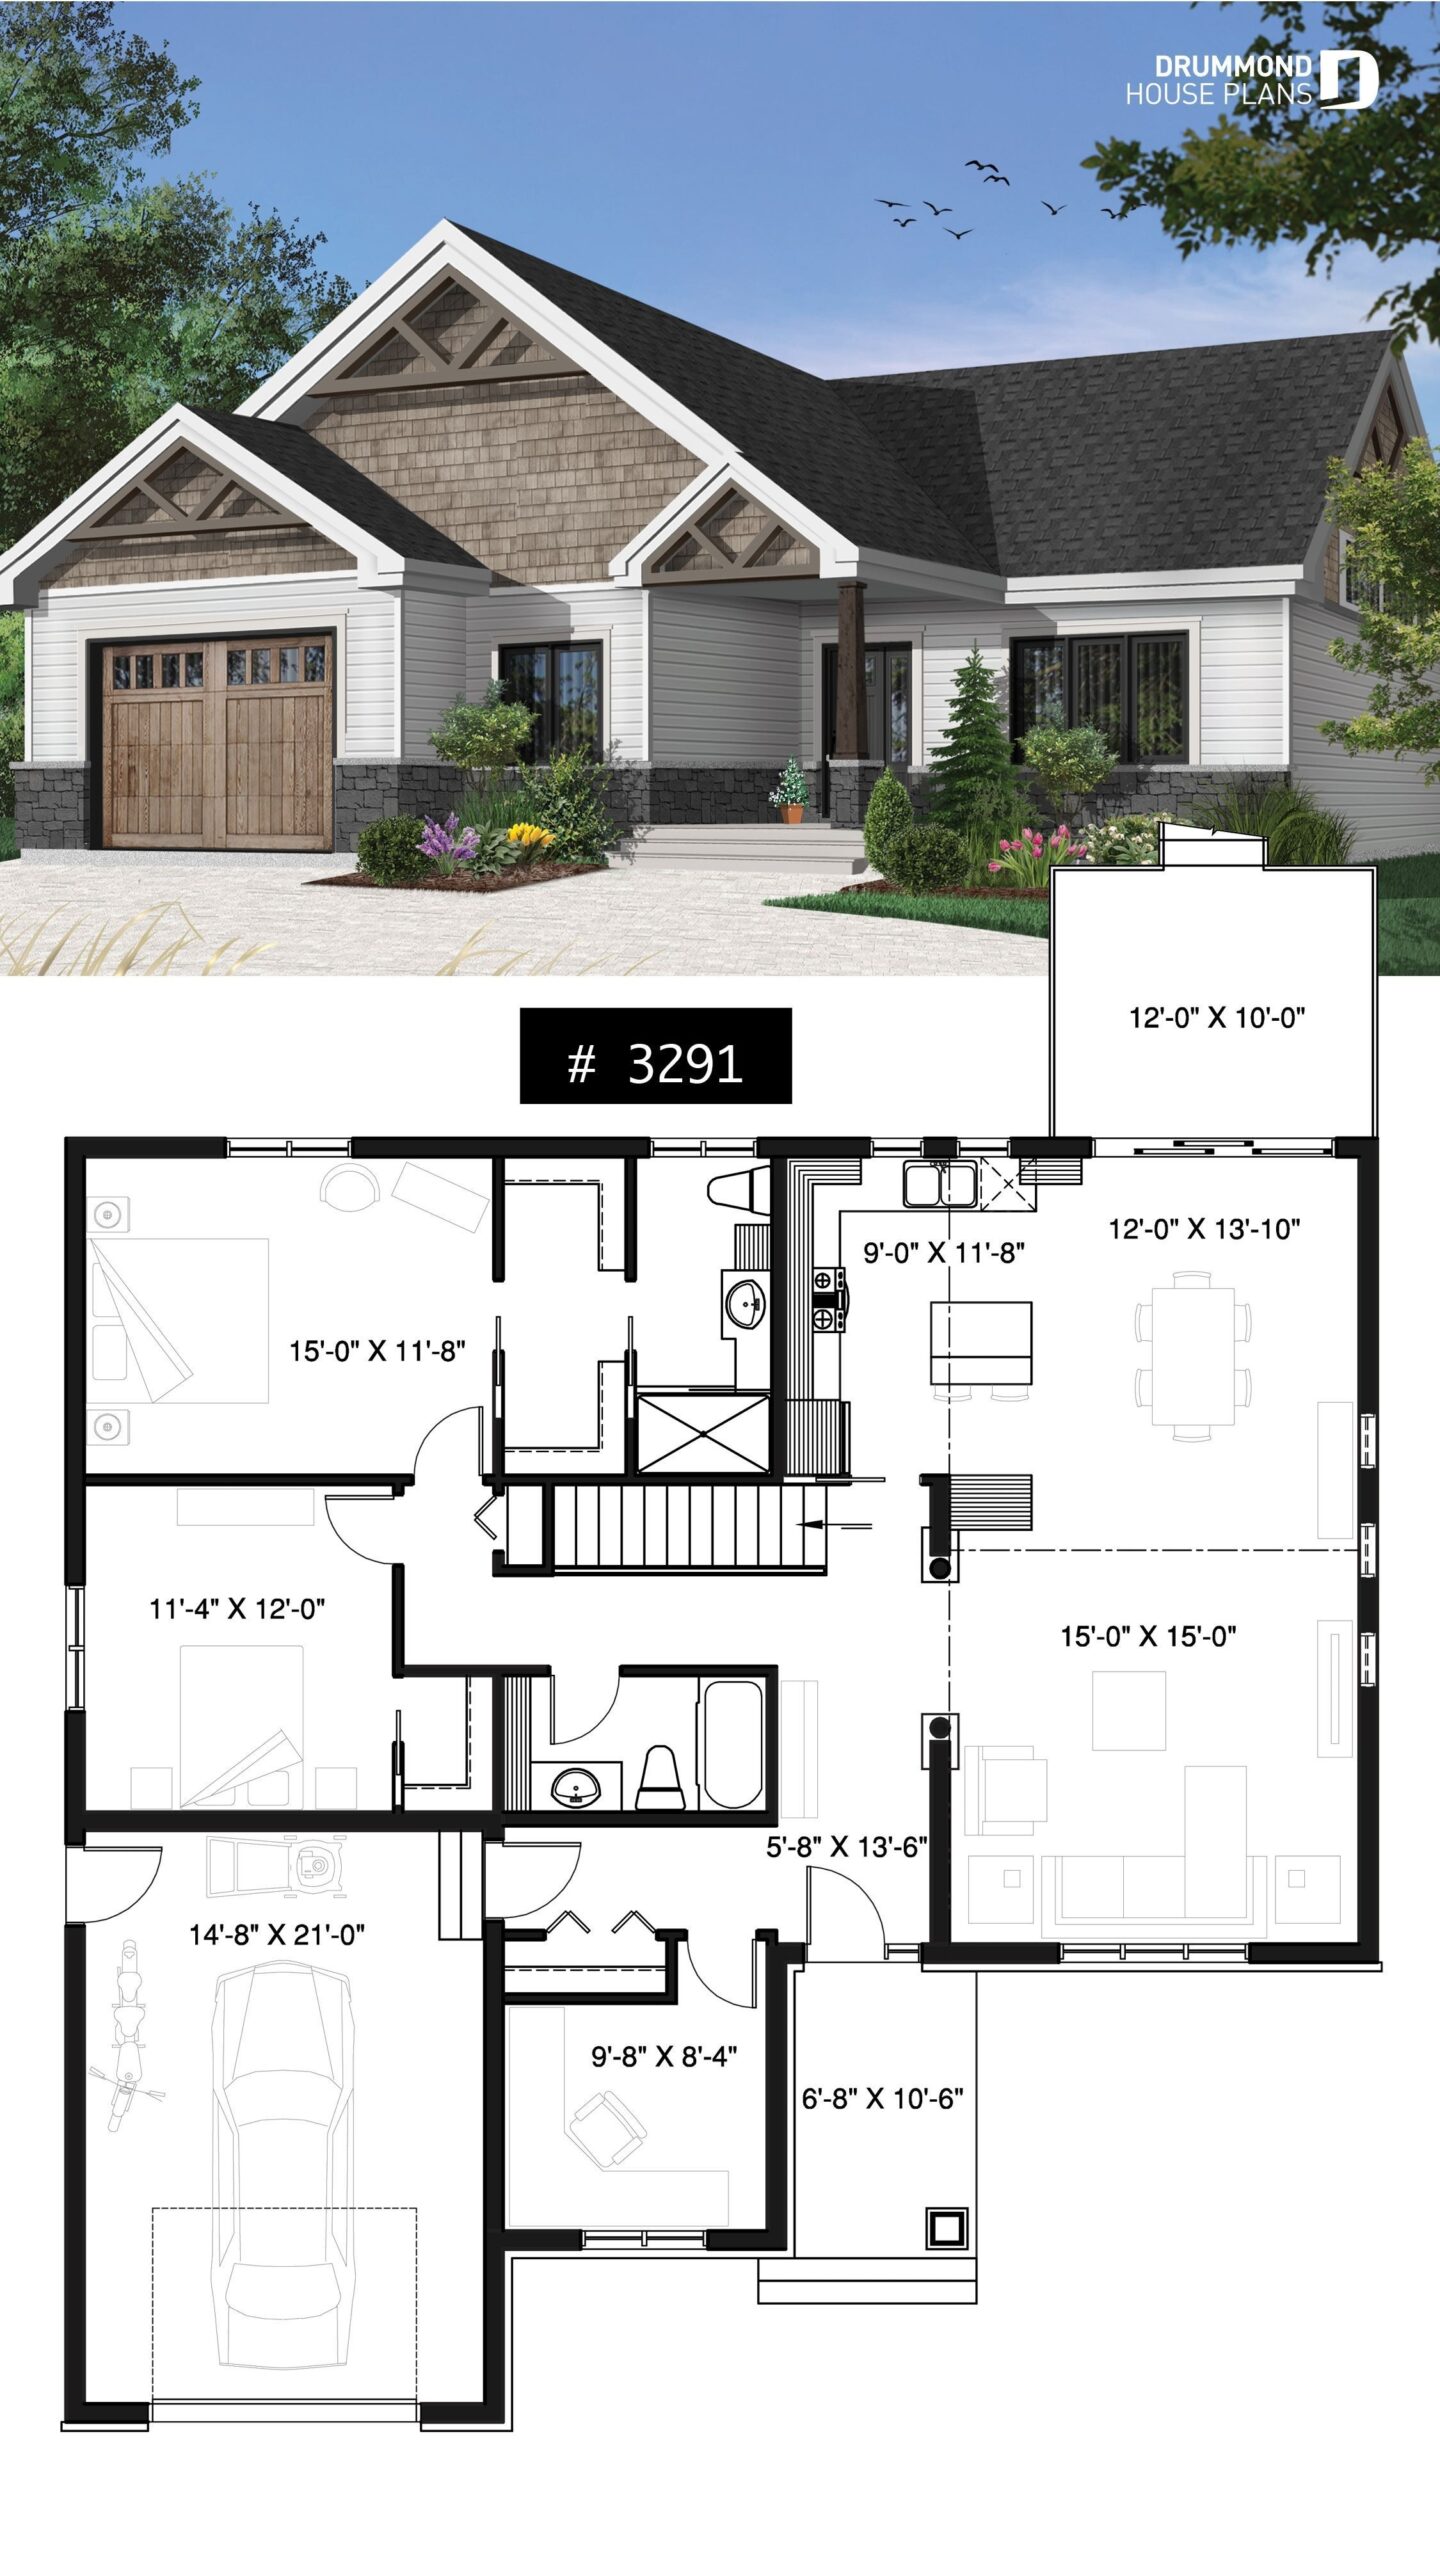 Splendid one story northwest style house plan with 3 bedrooms ou 2 beds home pertaining to small house plan 3 bedroom